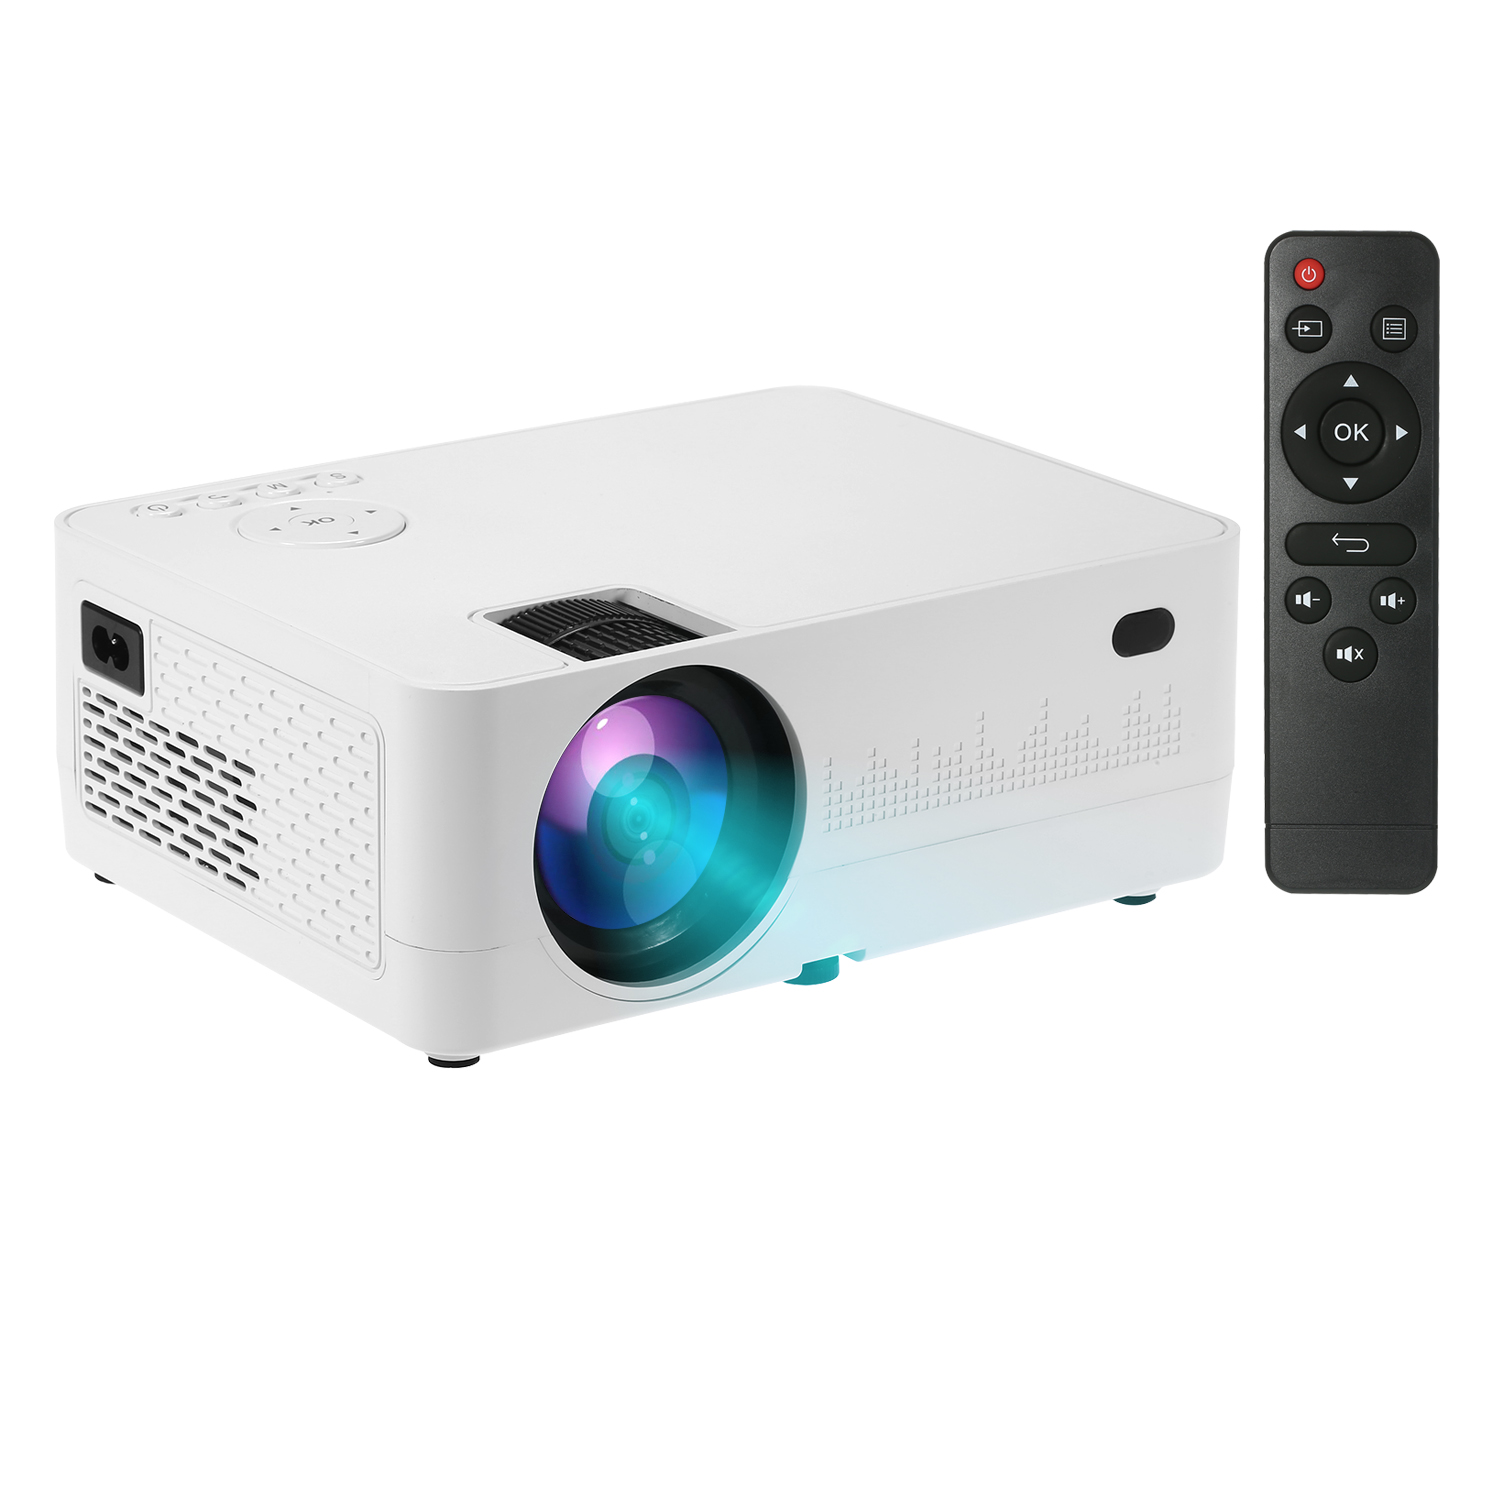 Portable Home Theater LED Projector 1080P Supported 6500 Lux Home Video Movie Projector 140 Inch Display Built-in Speaker